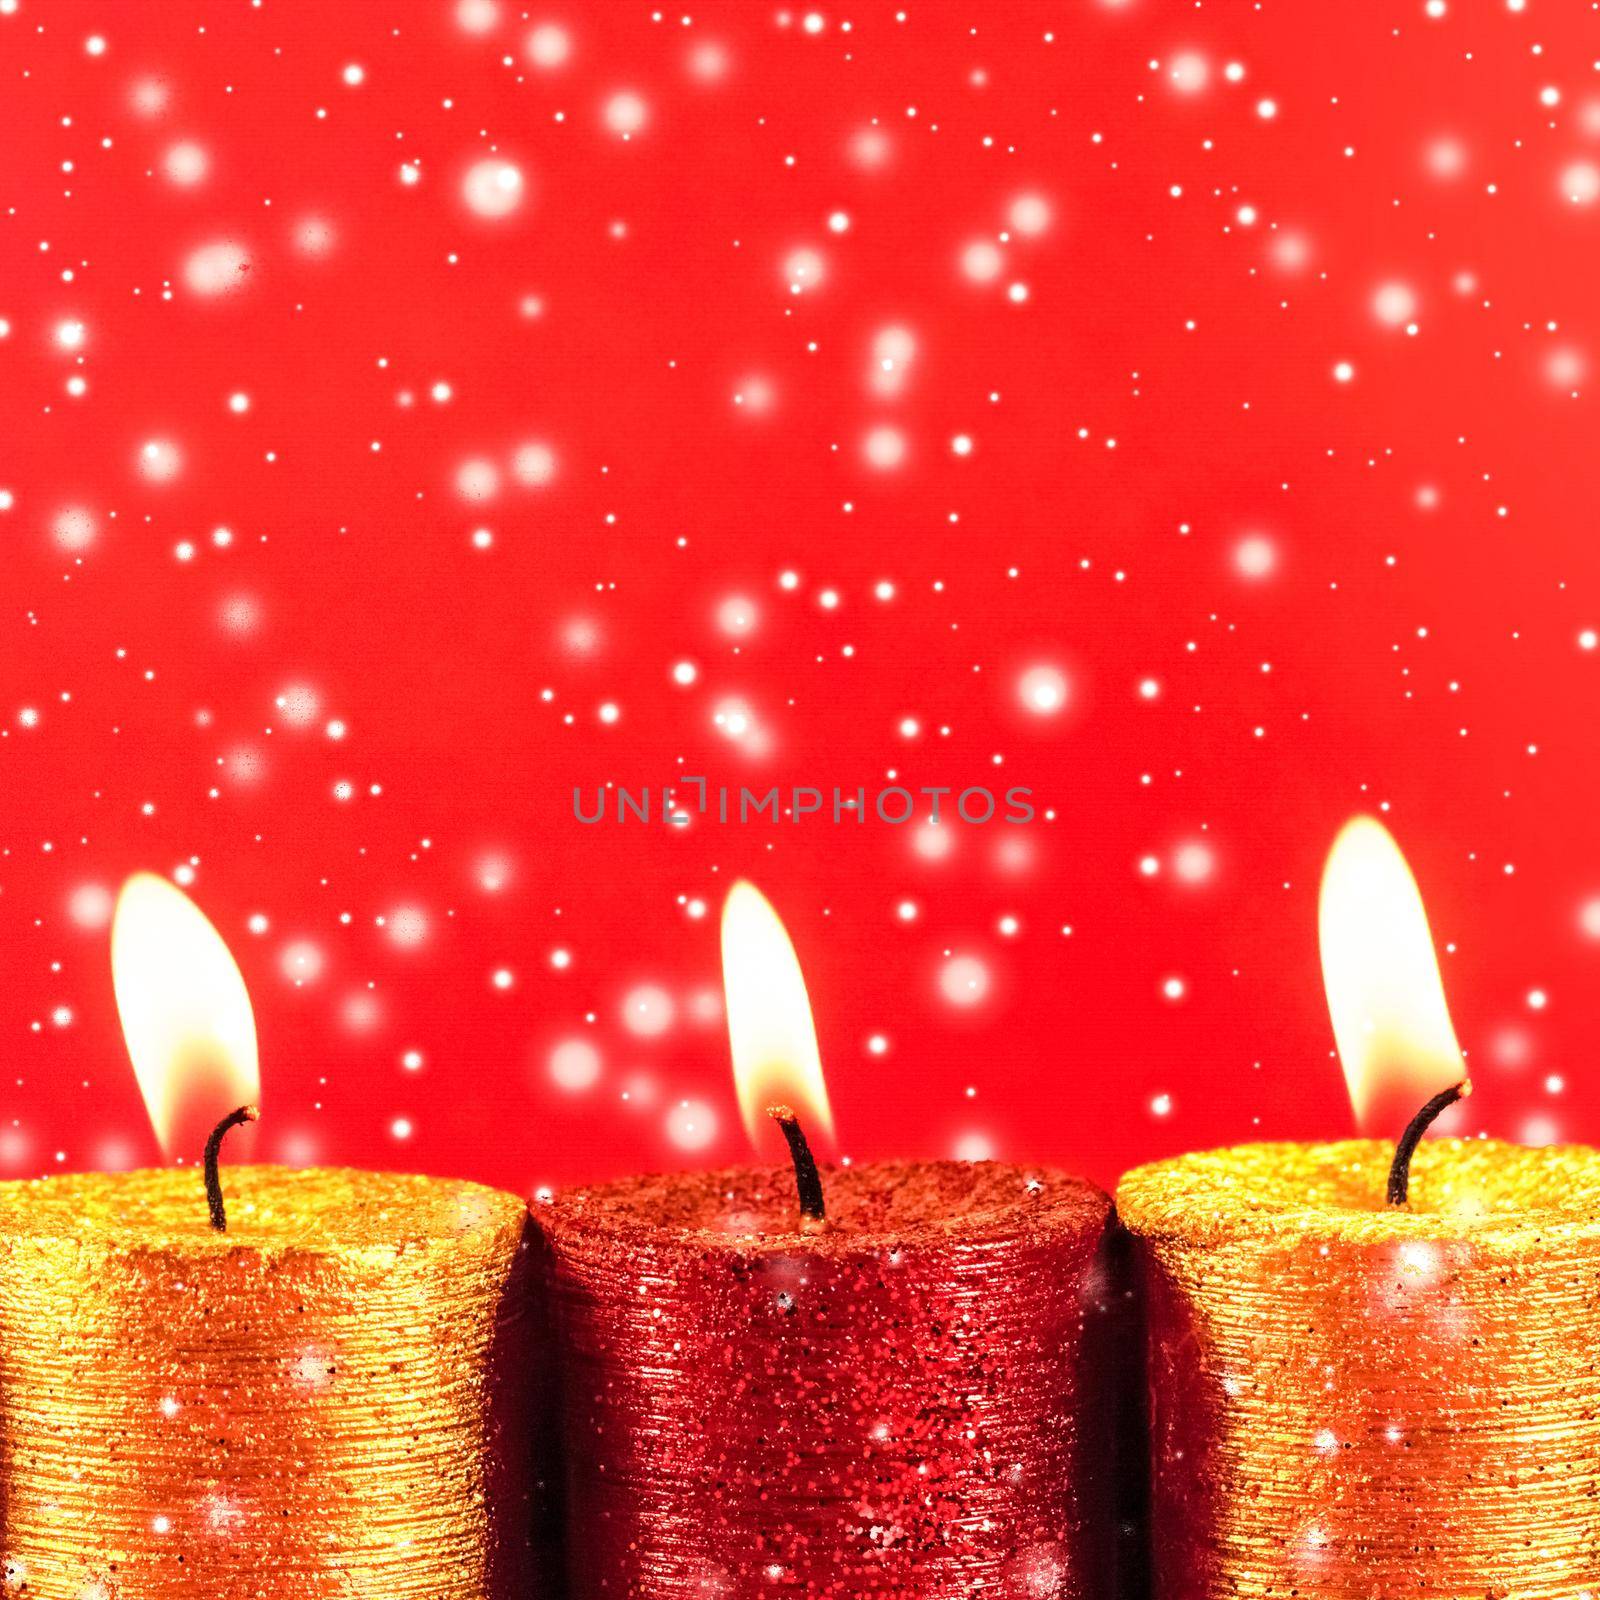 Winter, celebration and new years eve concept - Christmas candles and shiny snow on red background, holiday season decoration